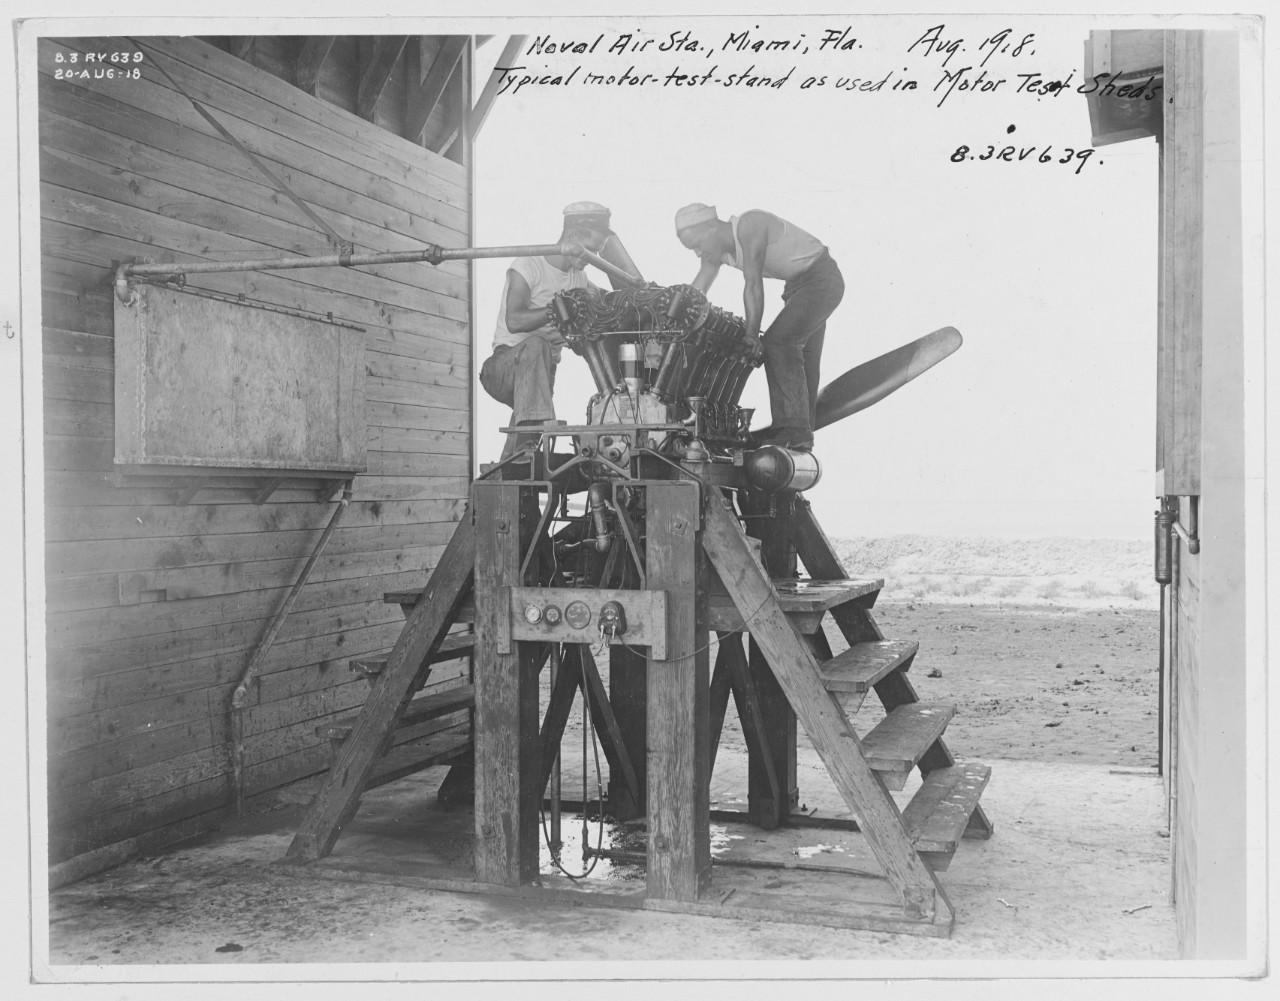 Typical motor-test-stand, Naval Air Station Miami, Florida.